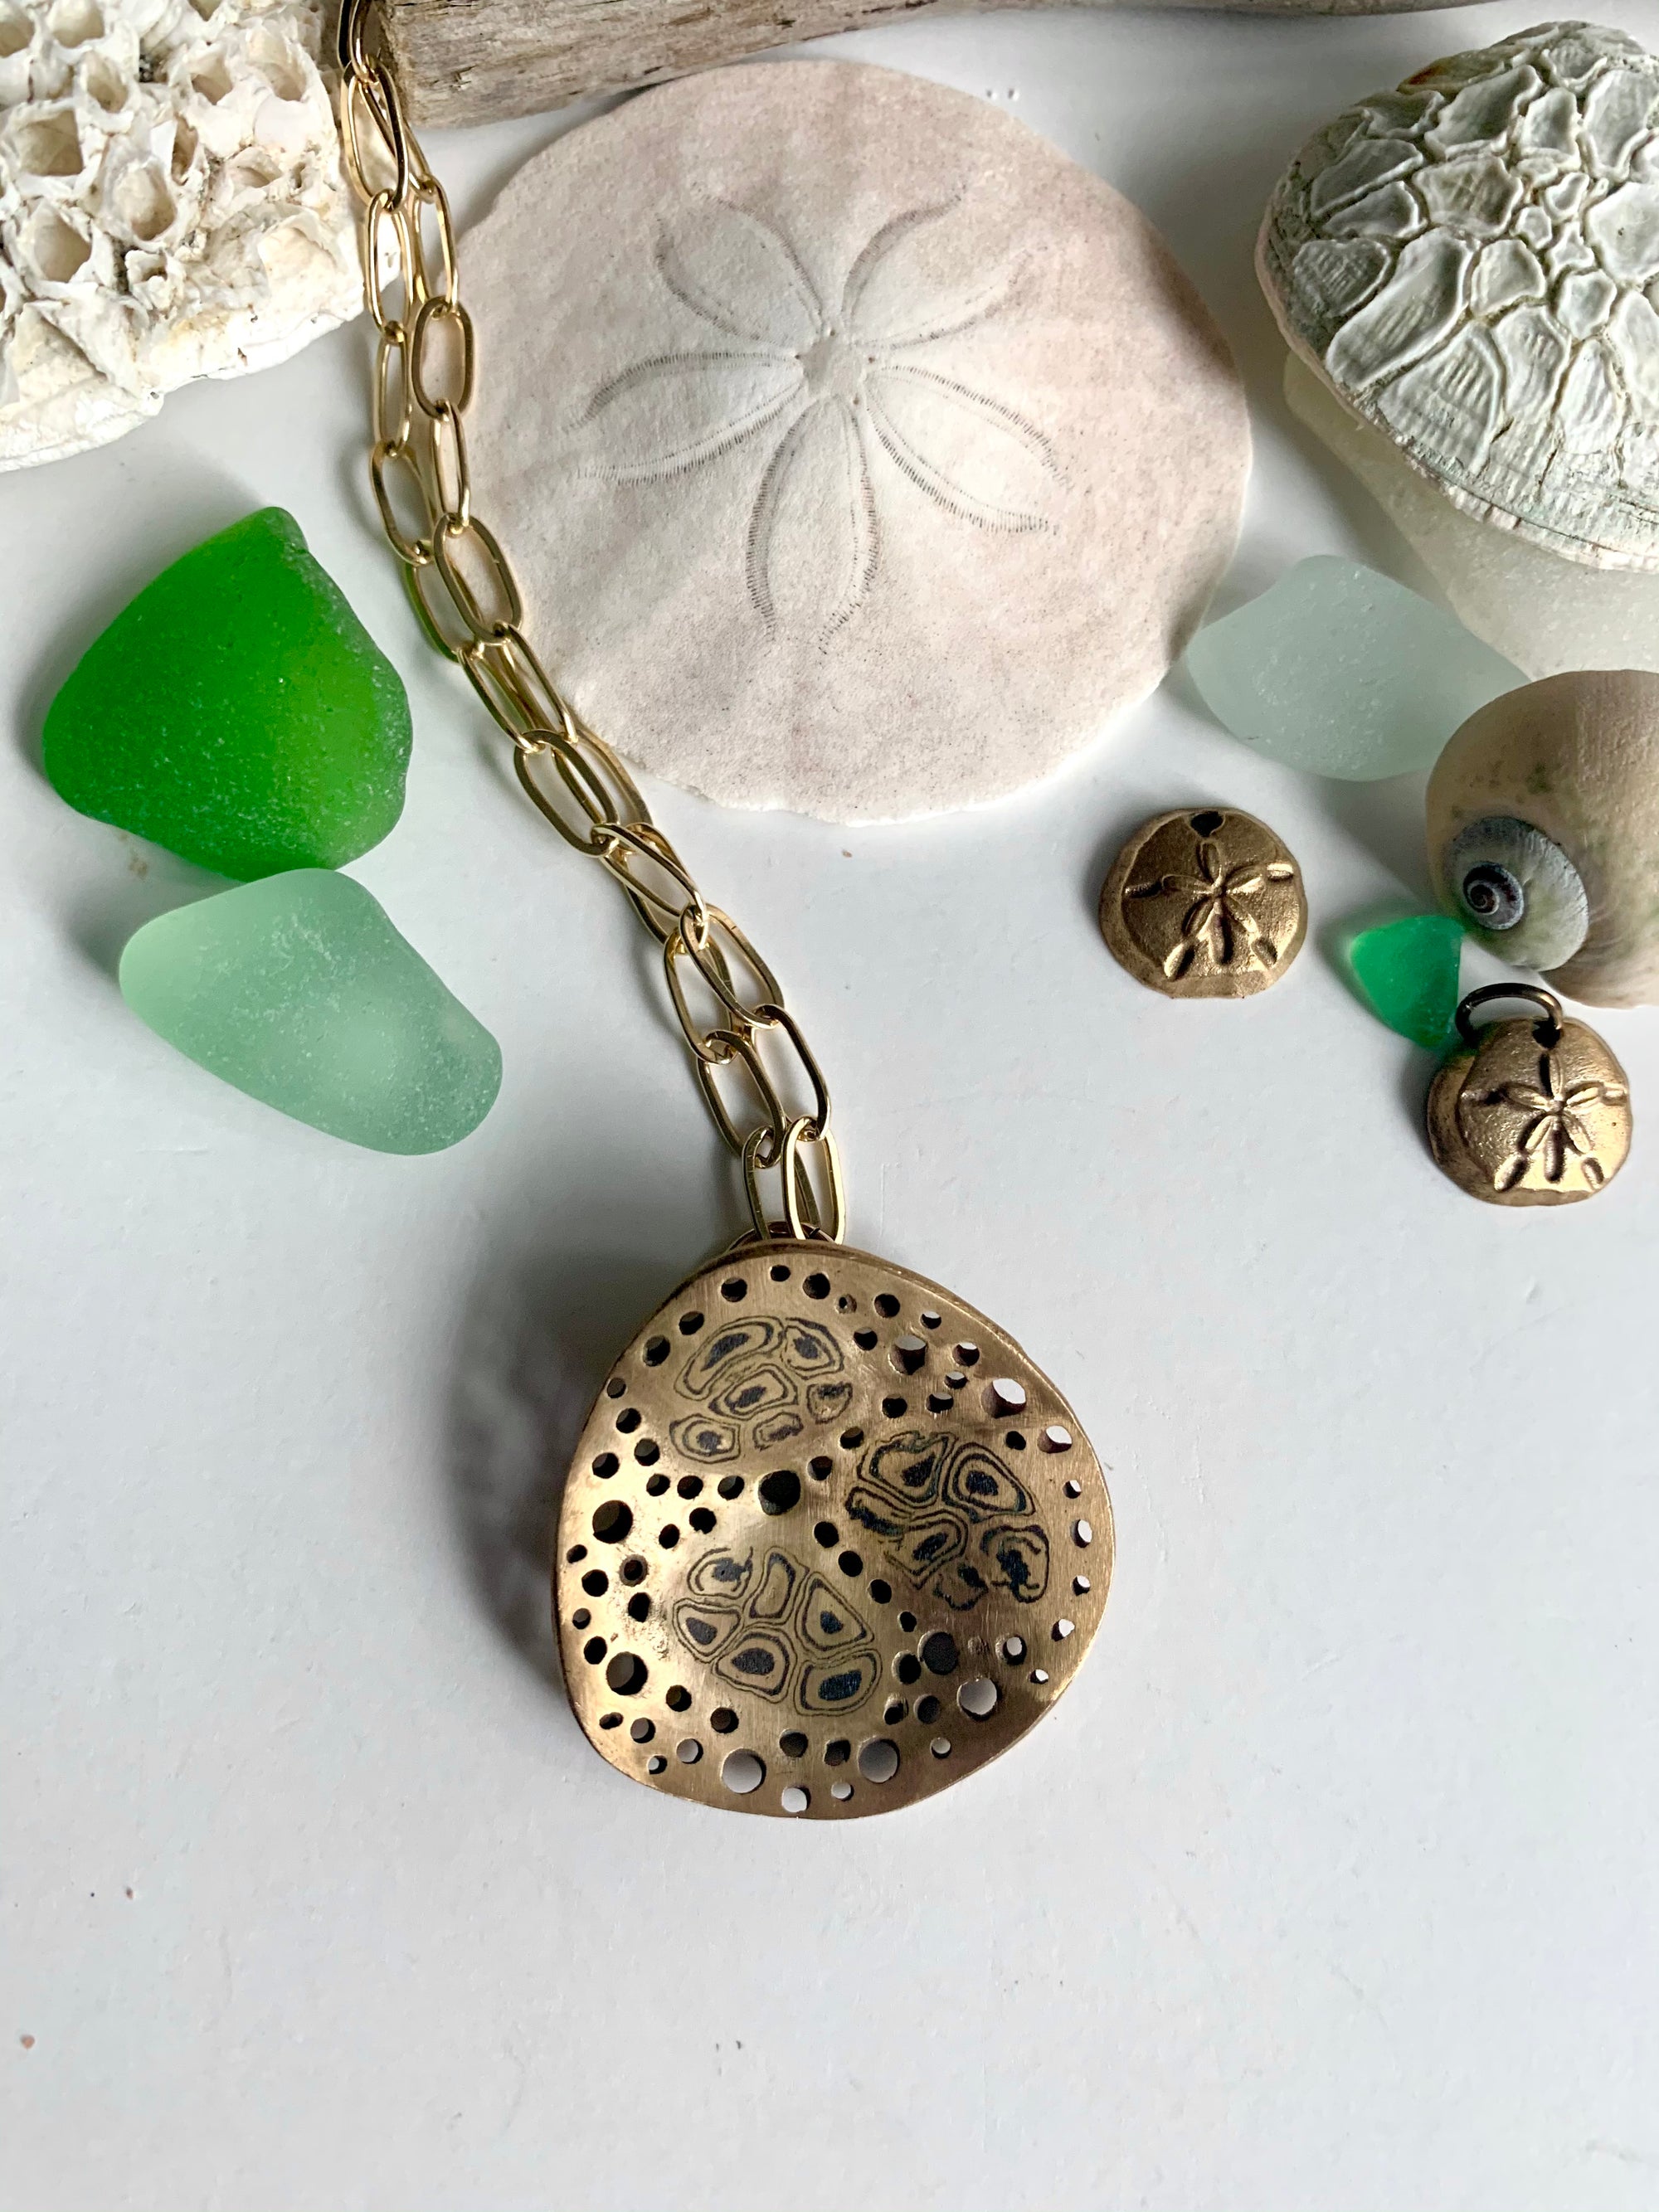 Green sea glass seashells and unique artisan made necklace